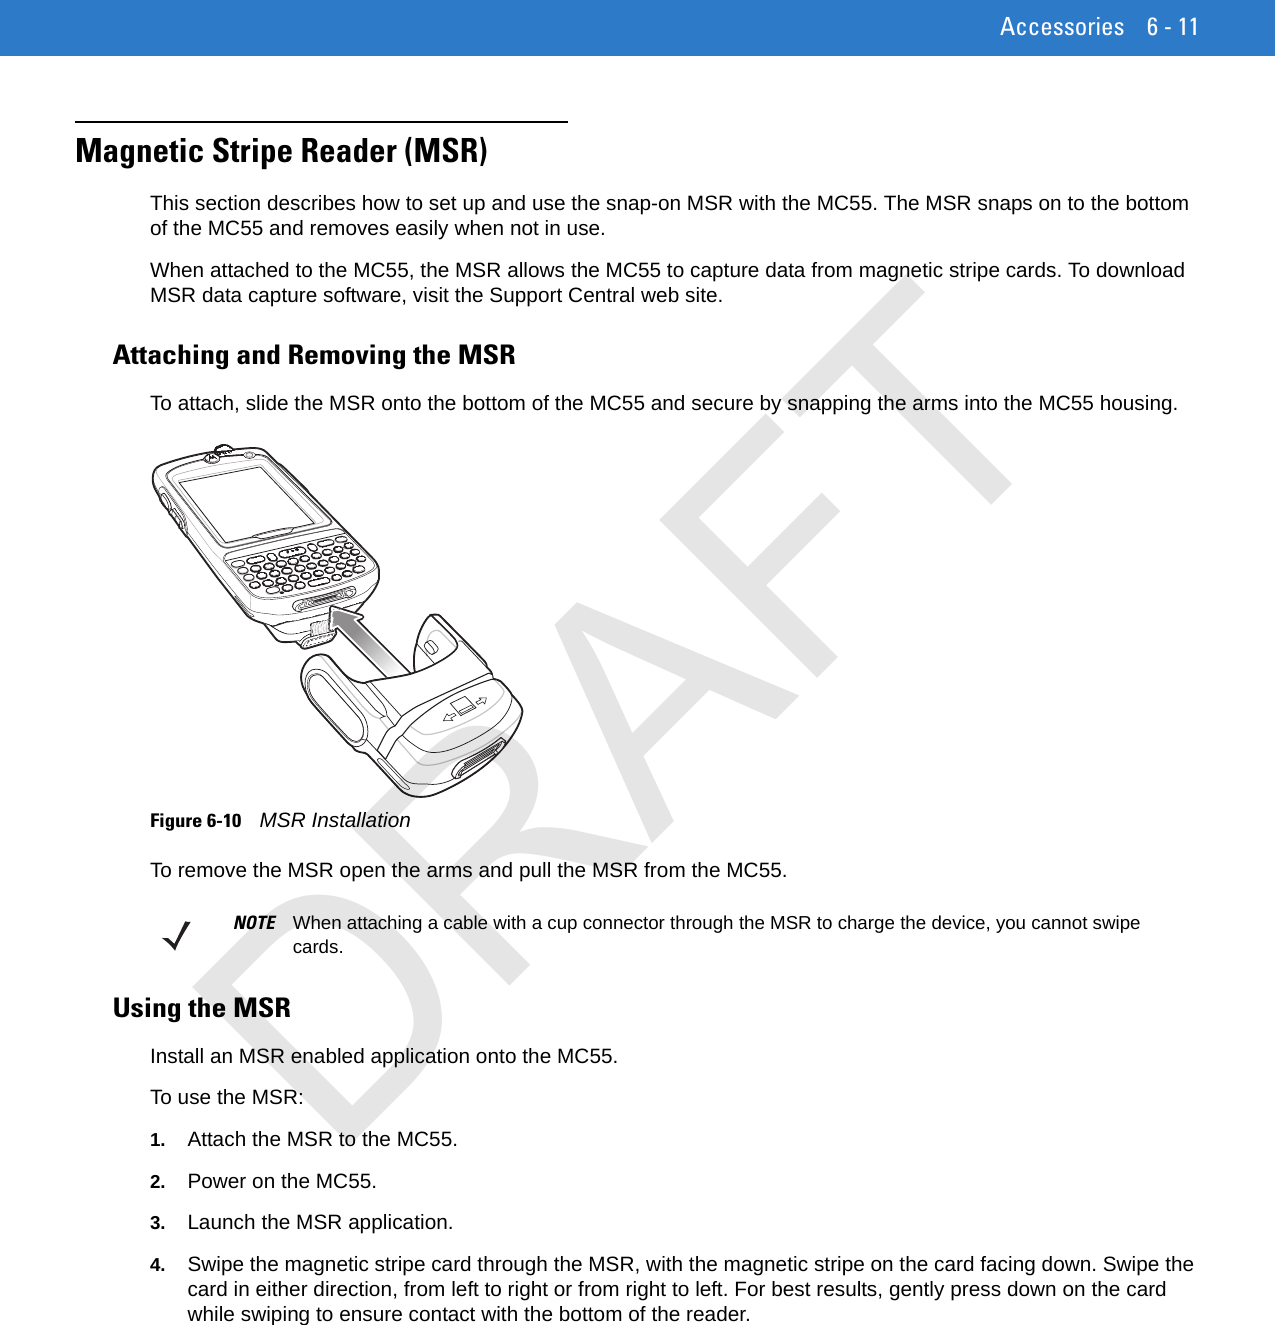 Accessories 6 - 11Magnetic Stripe Reader (MSR)This section describes how to set up and use the snap-on MSR with the MC55. The MSR snaps on to the bottom of the MC55 and removes easily when not in use.When attached to the MC55, the MSR allows the MC55 to capture data from magnetic stripe cards. To download MSR data capture software, visit the Support Central web site.Attaching and Removing the MSRTo attach, slide the MSR onto the bottom of the MC55 and secure by snapping the arms into the MC55 housing.Figure 6-10    MSR InstallationTo remove the MSR open the arms and pull the MSR from the MC55.Using the MSRInstall an MSR enabled application onto the MC55.To use the MSR:1. Attach the MSR to the MC55.2. Power on the MC55.3. Launch the MSR application.4. Swipe the magnetic stripe card through the MSR, with the magnetic stripe on the card facing down. Swipe the card in either direction, from left to right or from right to left. For best results, gently press down on the card while swiping to ensure contact with the bottom of the reader.NOTE When attaching a cable with a cup connector through the MSR to charge the device, you cannot swipe cards.DRAFT